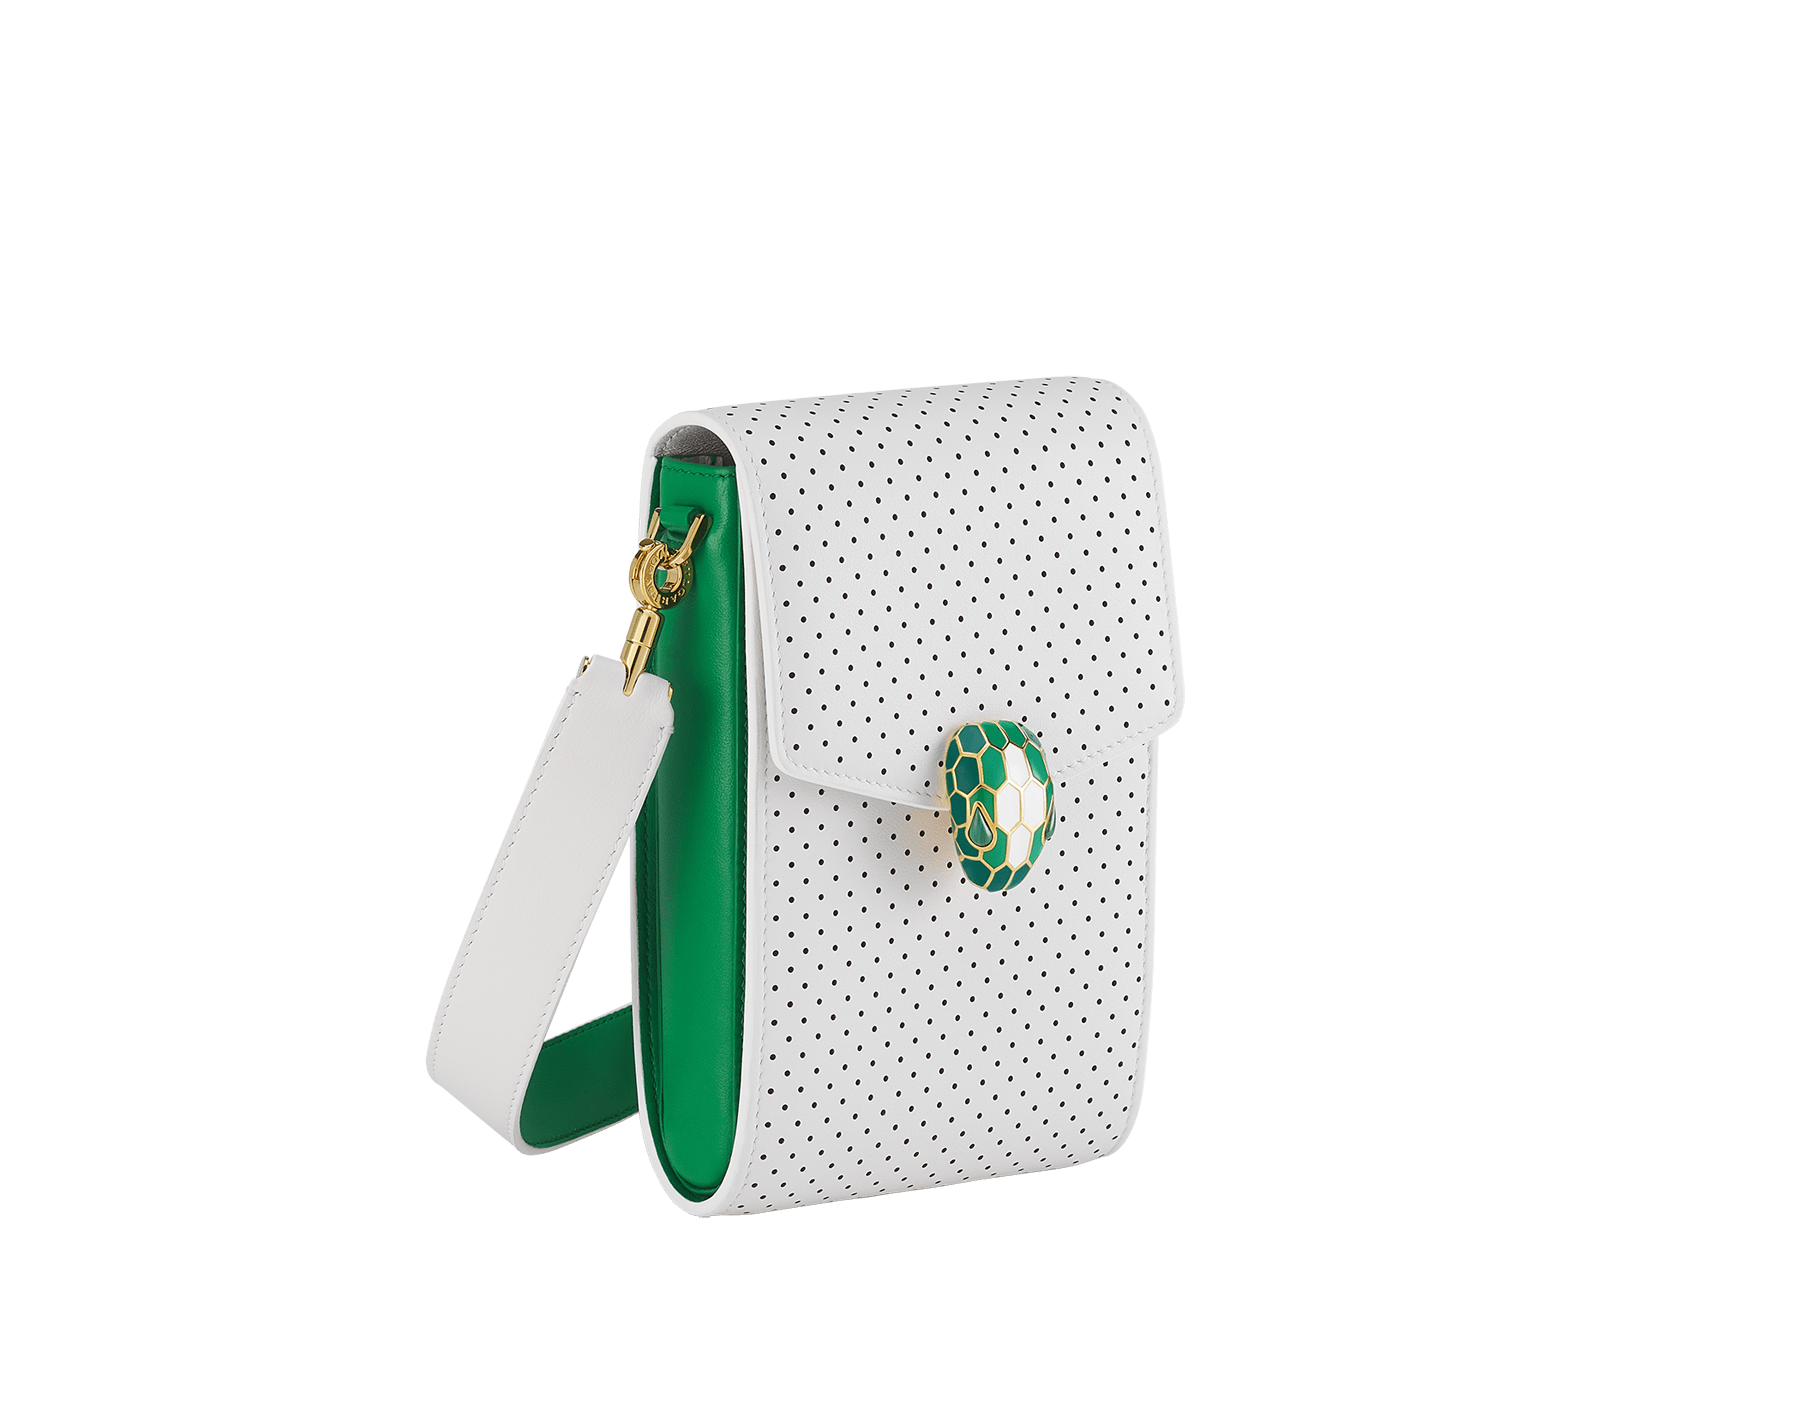 Casablanca x Bulgari small vertical pochette in white Tennis Groundstroke perforated calf leather with smooth tennis green calf leather on the sides and tennis green nappa leather lining. Captivating snakehead closure in gold-plated brass embellished with dégradé green and bright white enamel scales, and green malachite eyes. 292333 image 1